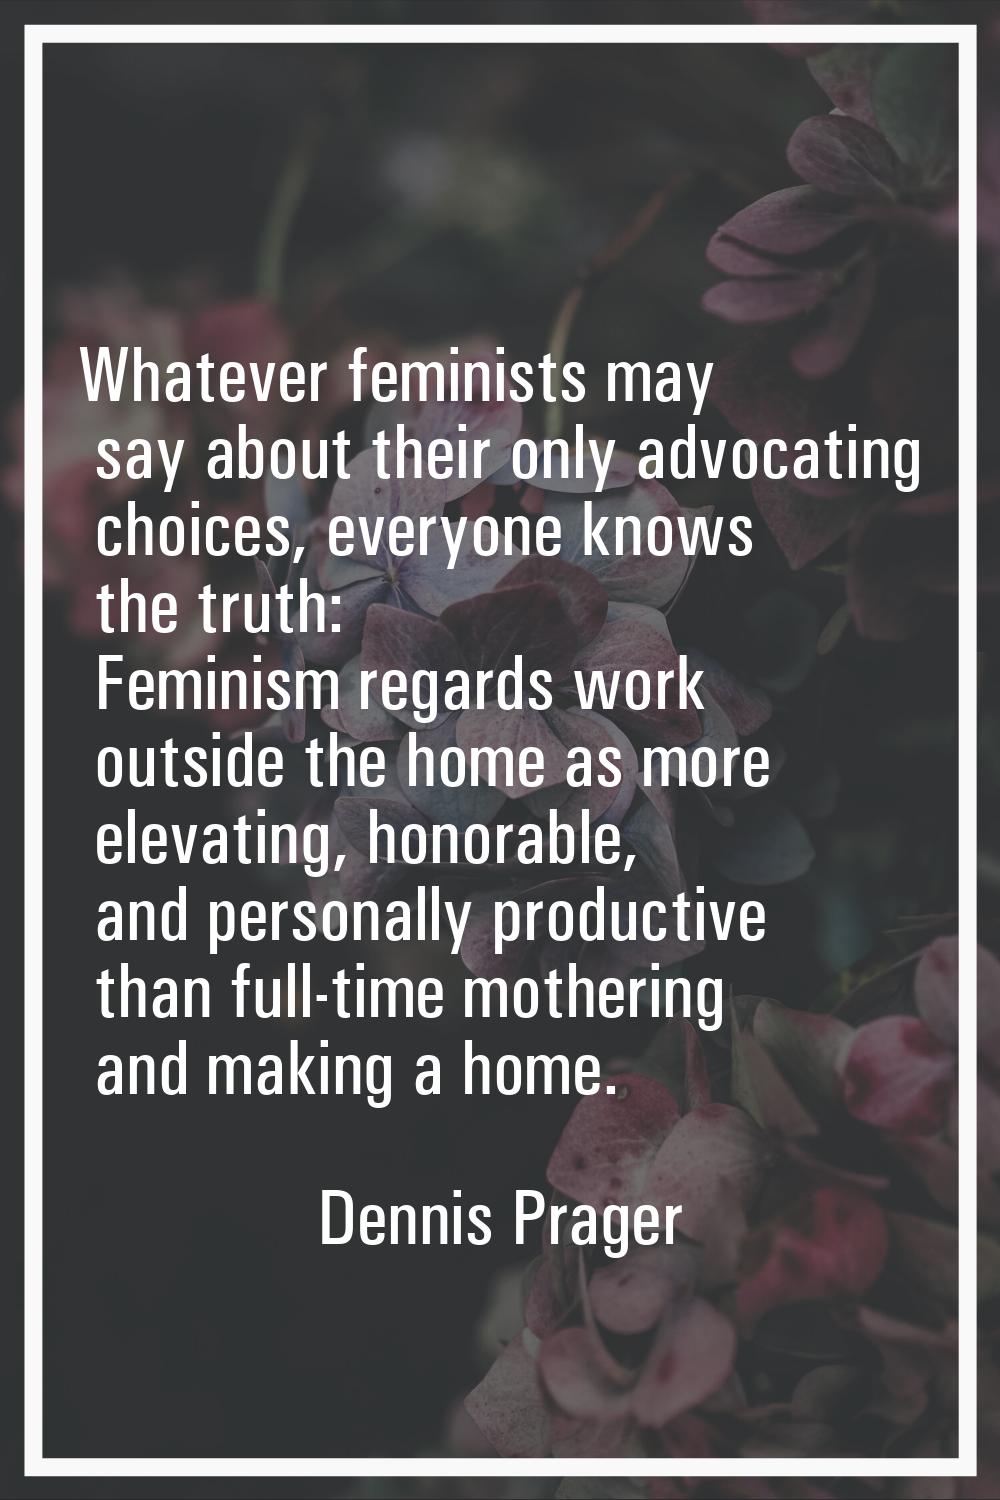 Whatever feminists may say about their only advocating choices, everyone knows the truth: Feminism 